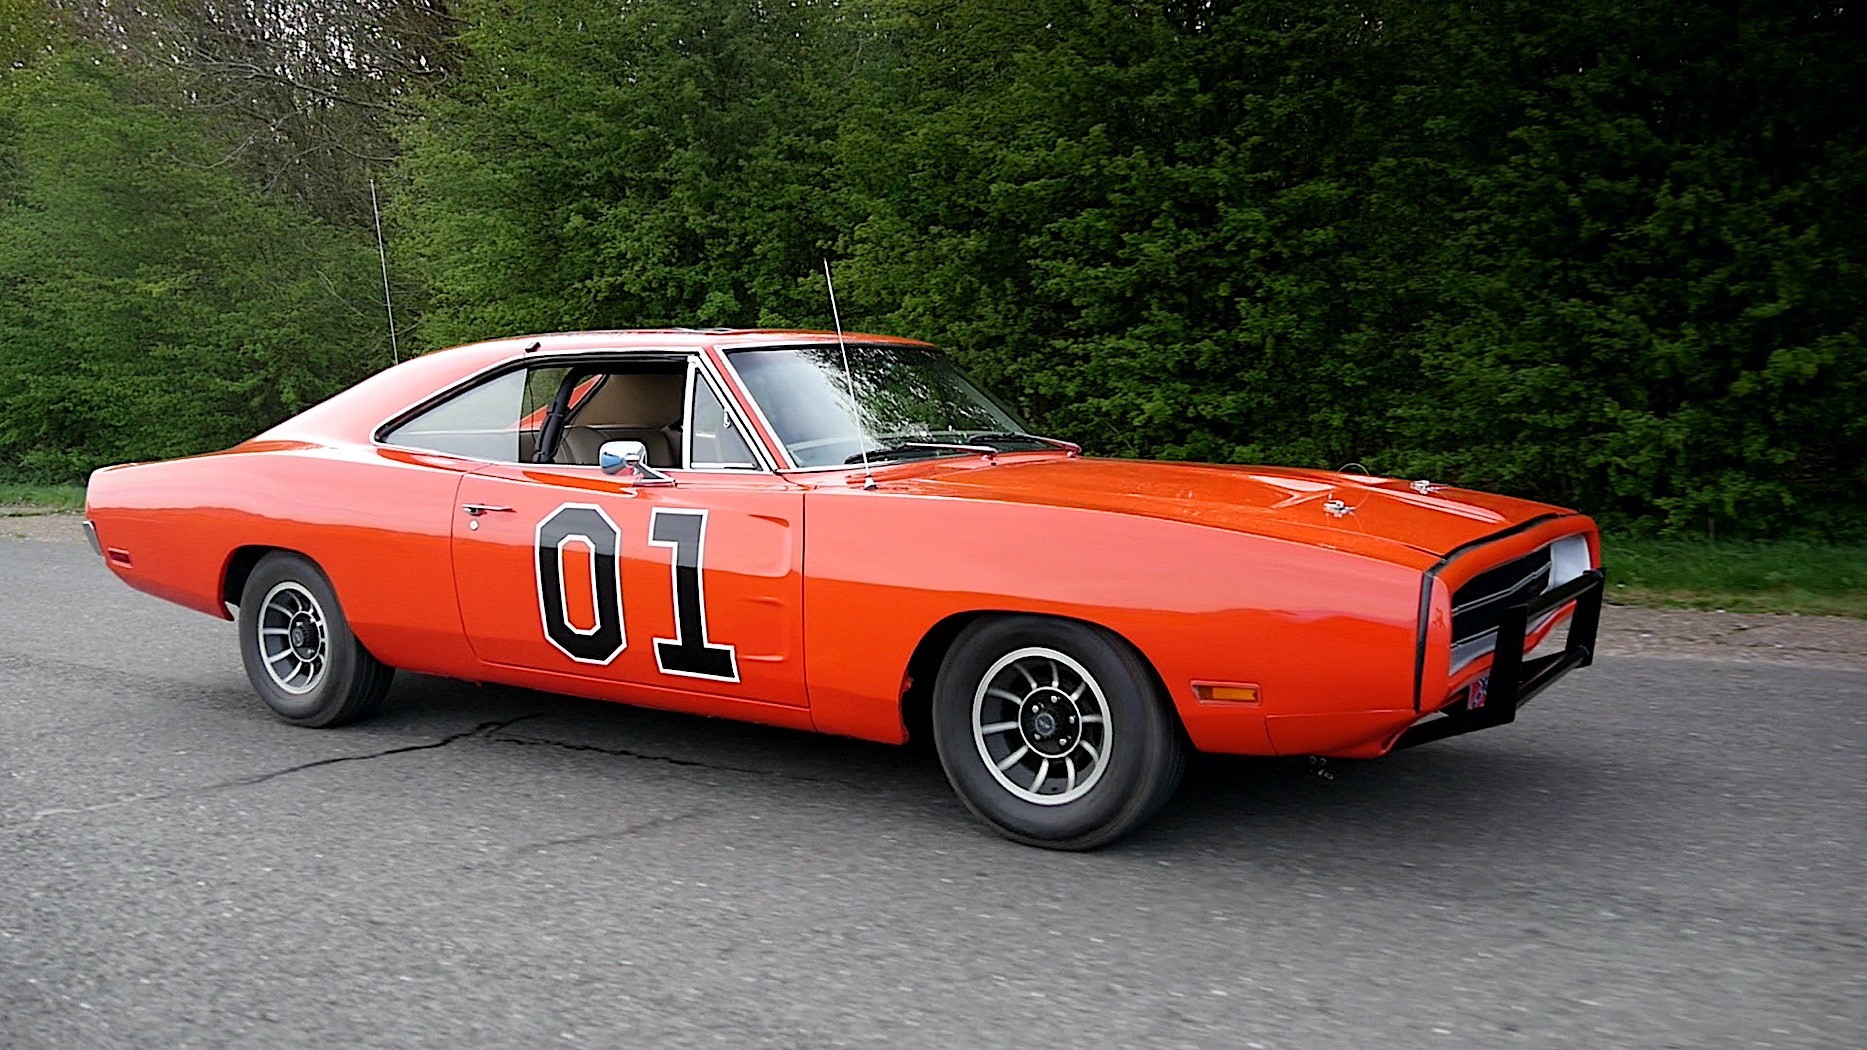 Dodge Charger General Lee Is the Most Popular 80s TV Series Car ...